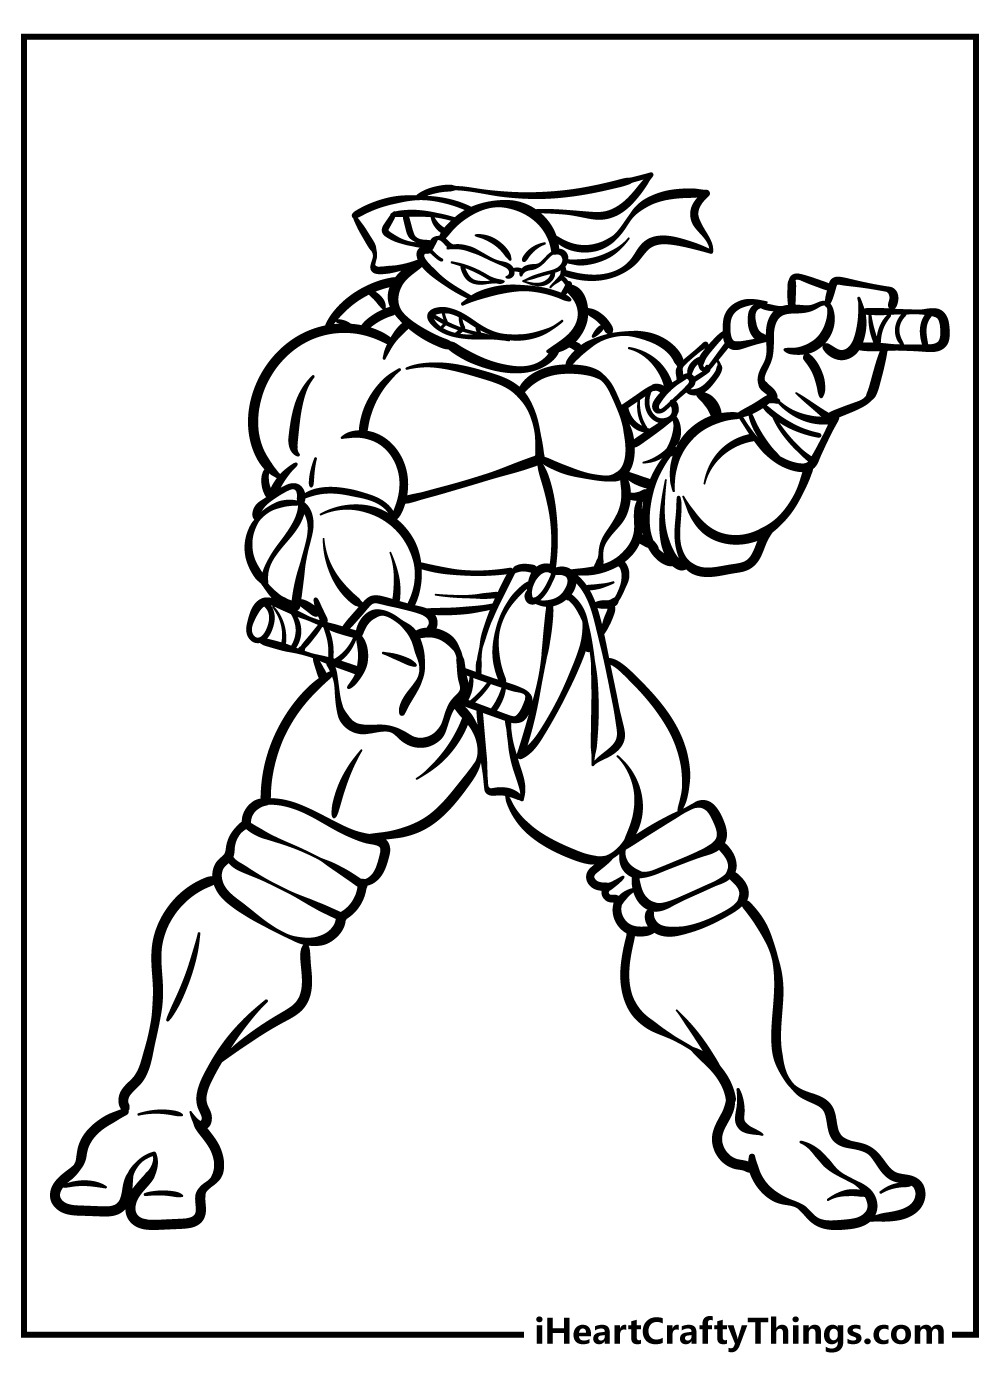 Ninja Turtles Coloring Pages for adults free printable